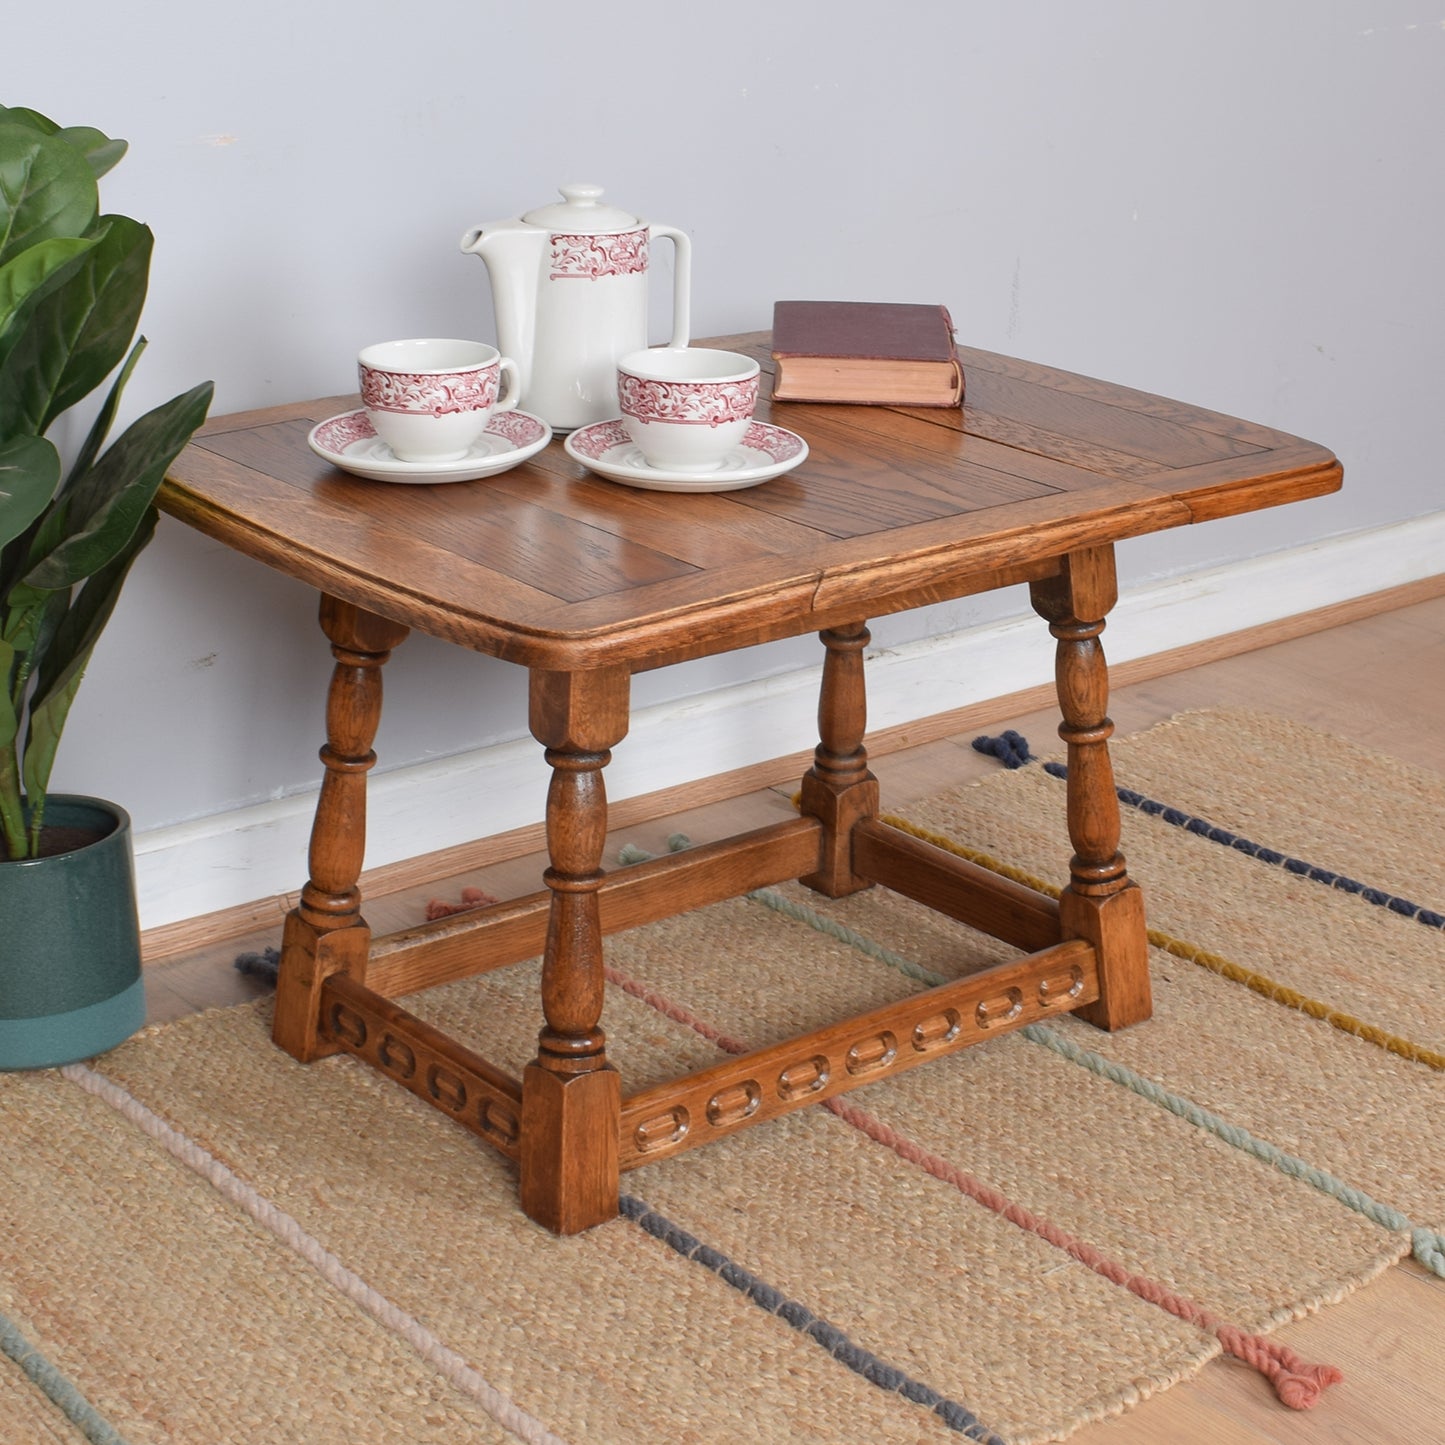 Small Drop-Leaf Table